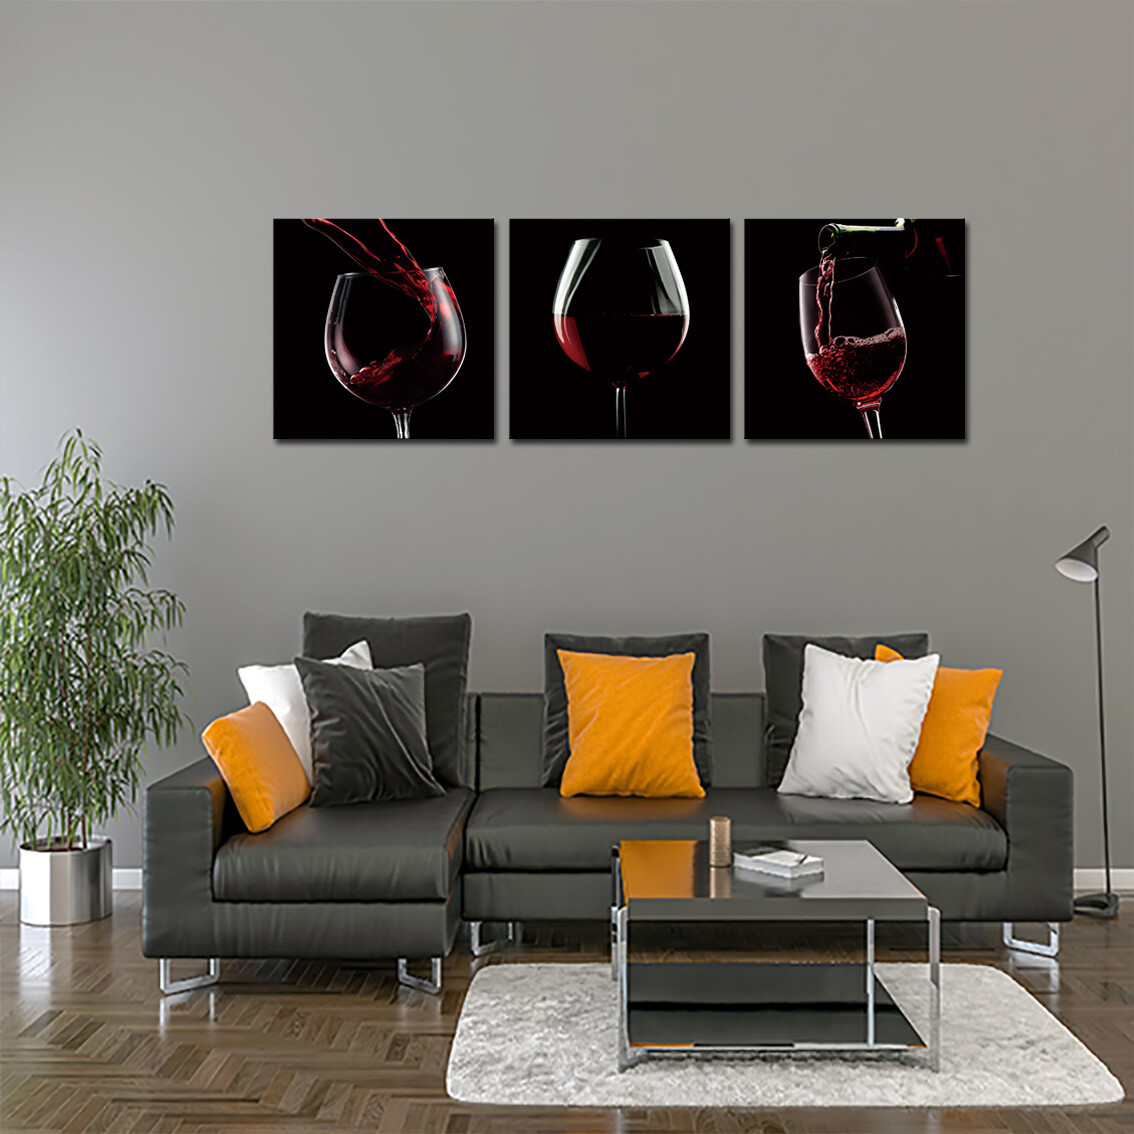 Vino Rosso - Modern Luxury Wall art Printed on Acrylic Glass - Frameless and Ready to Hang